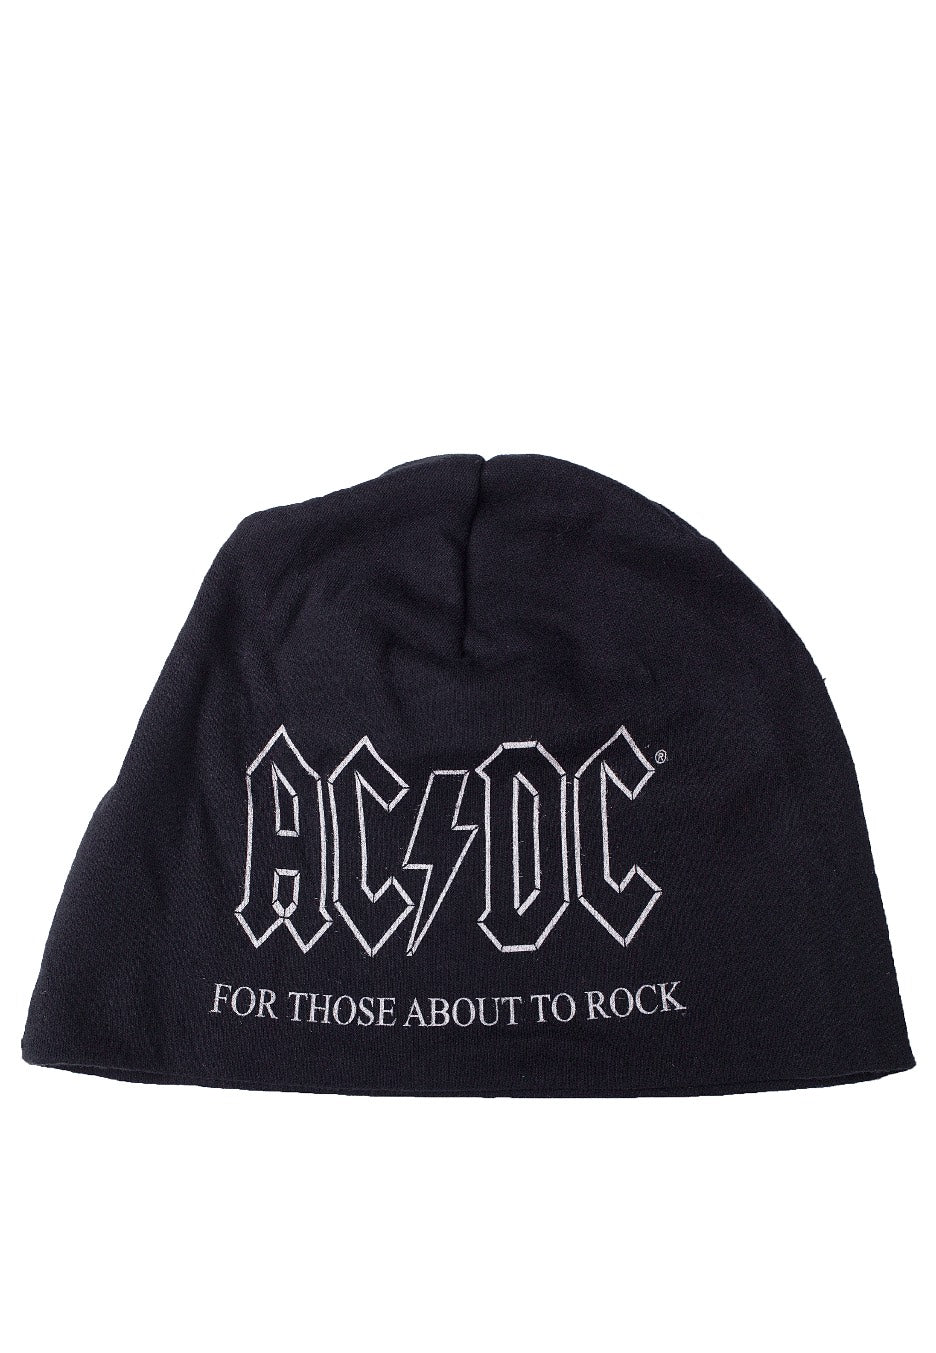 AC/DC - For Those About To Rock - Beanie